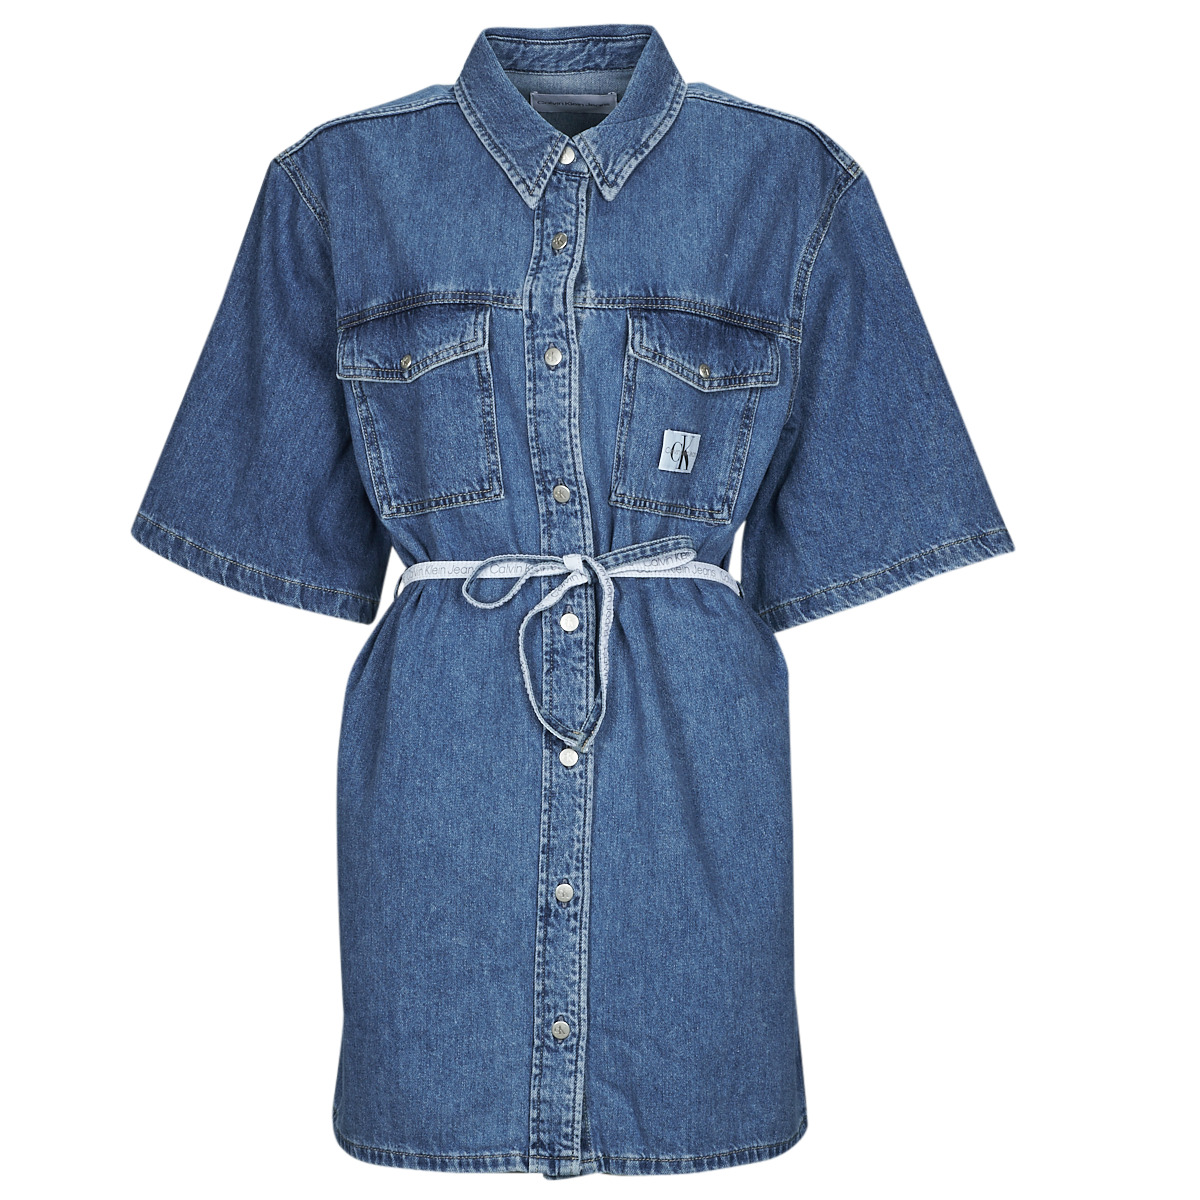 Klein | - DRESS Jean Jeans delivery Short Spartoo BELTED Women ! Clothing - Dresses SHIRT Calvin Free NET UTILITY